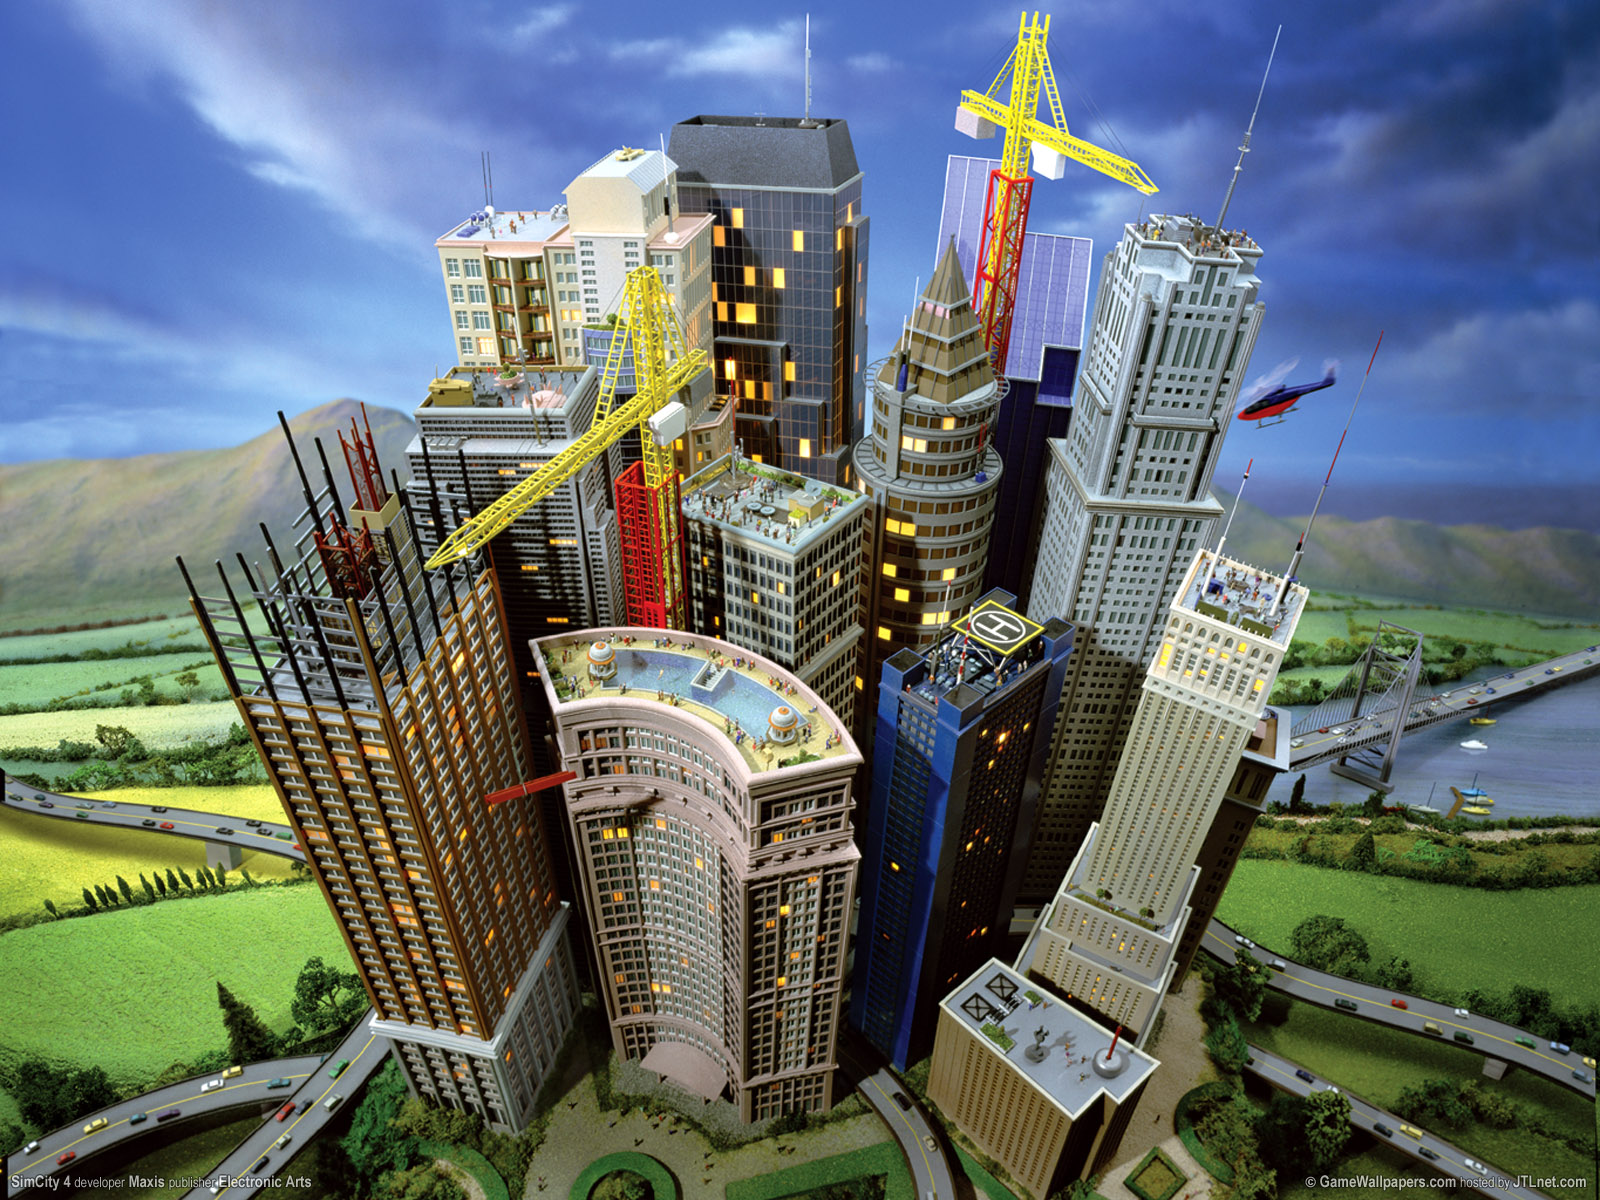 download simcity for pc free